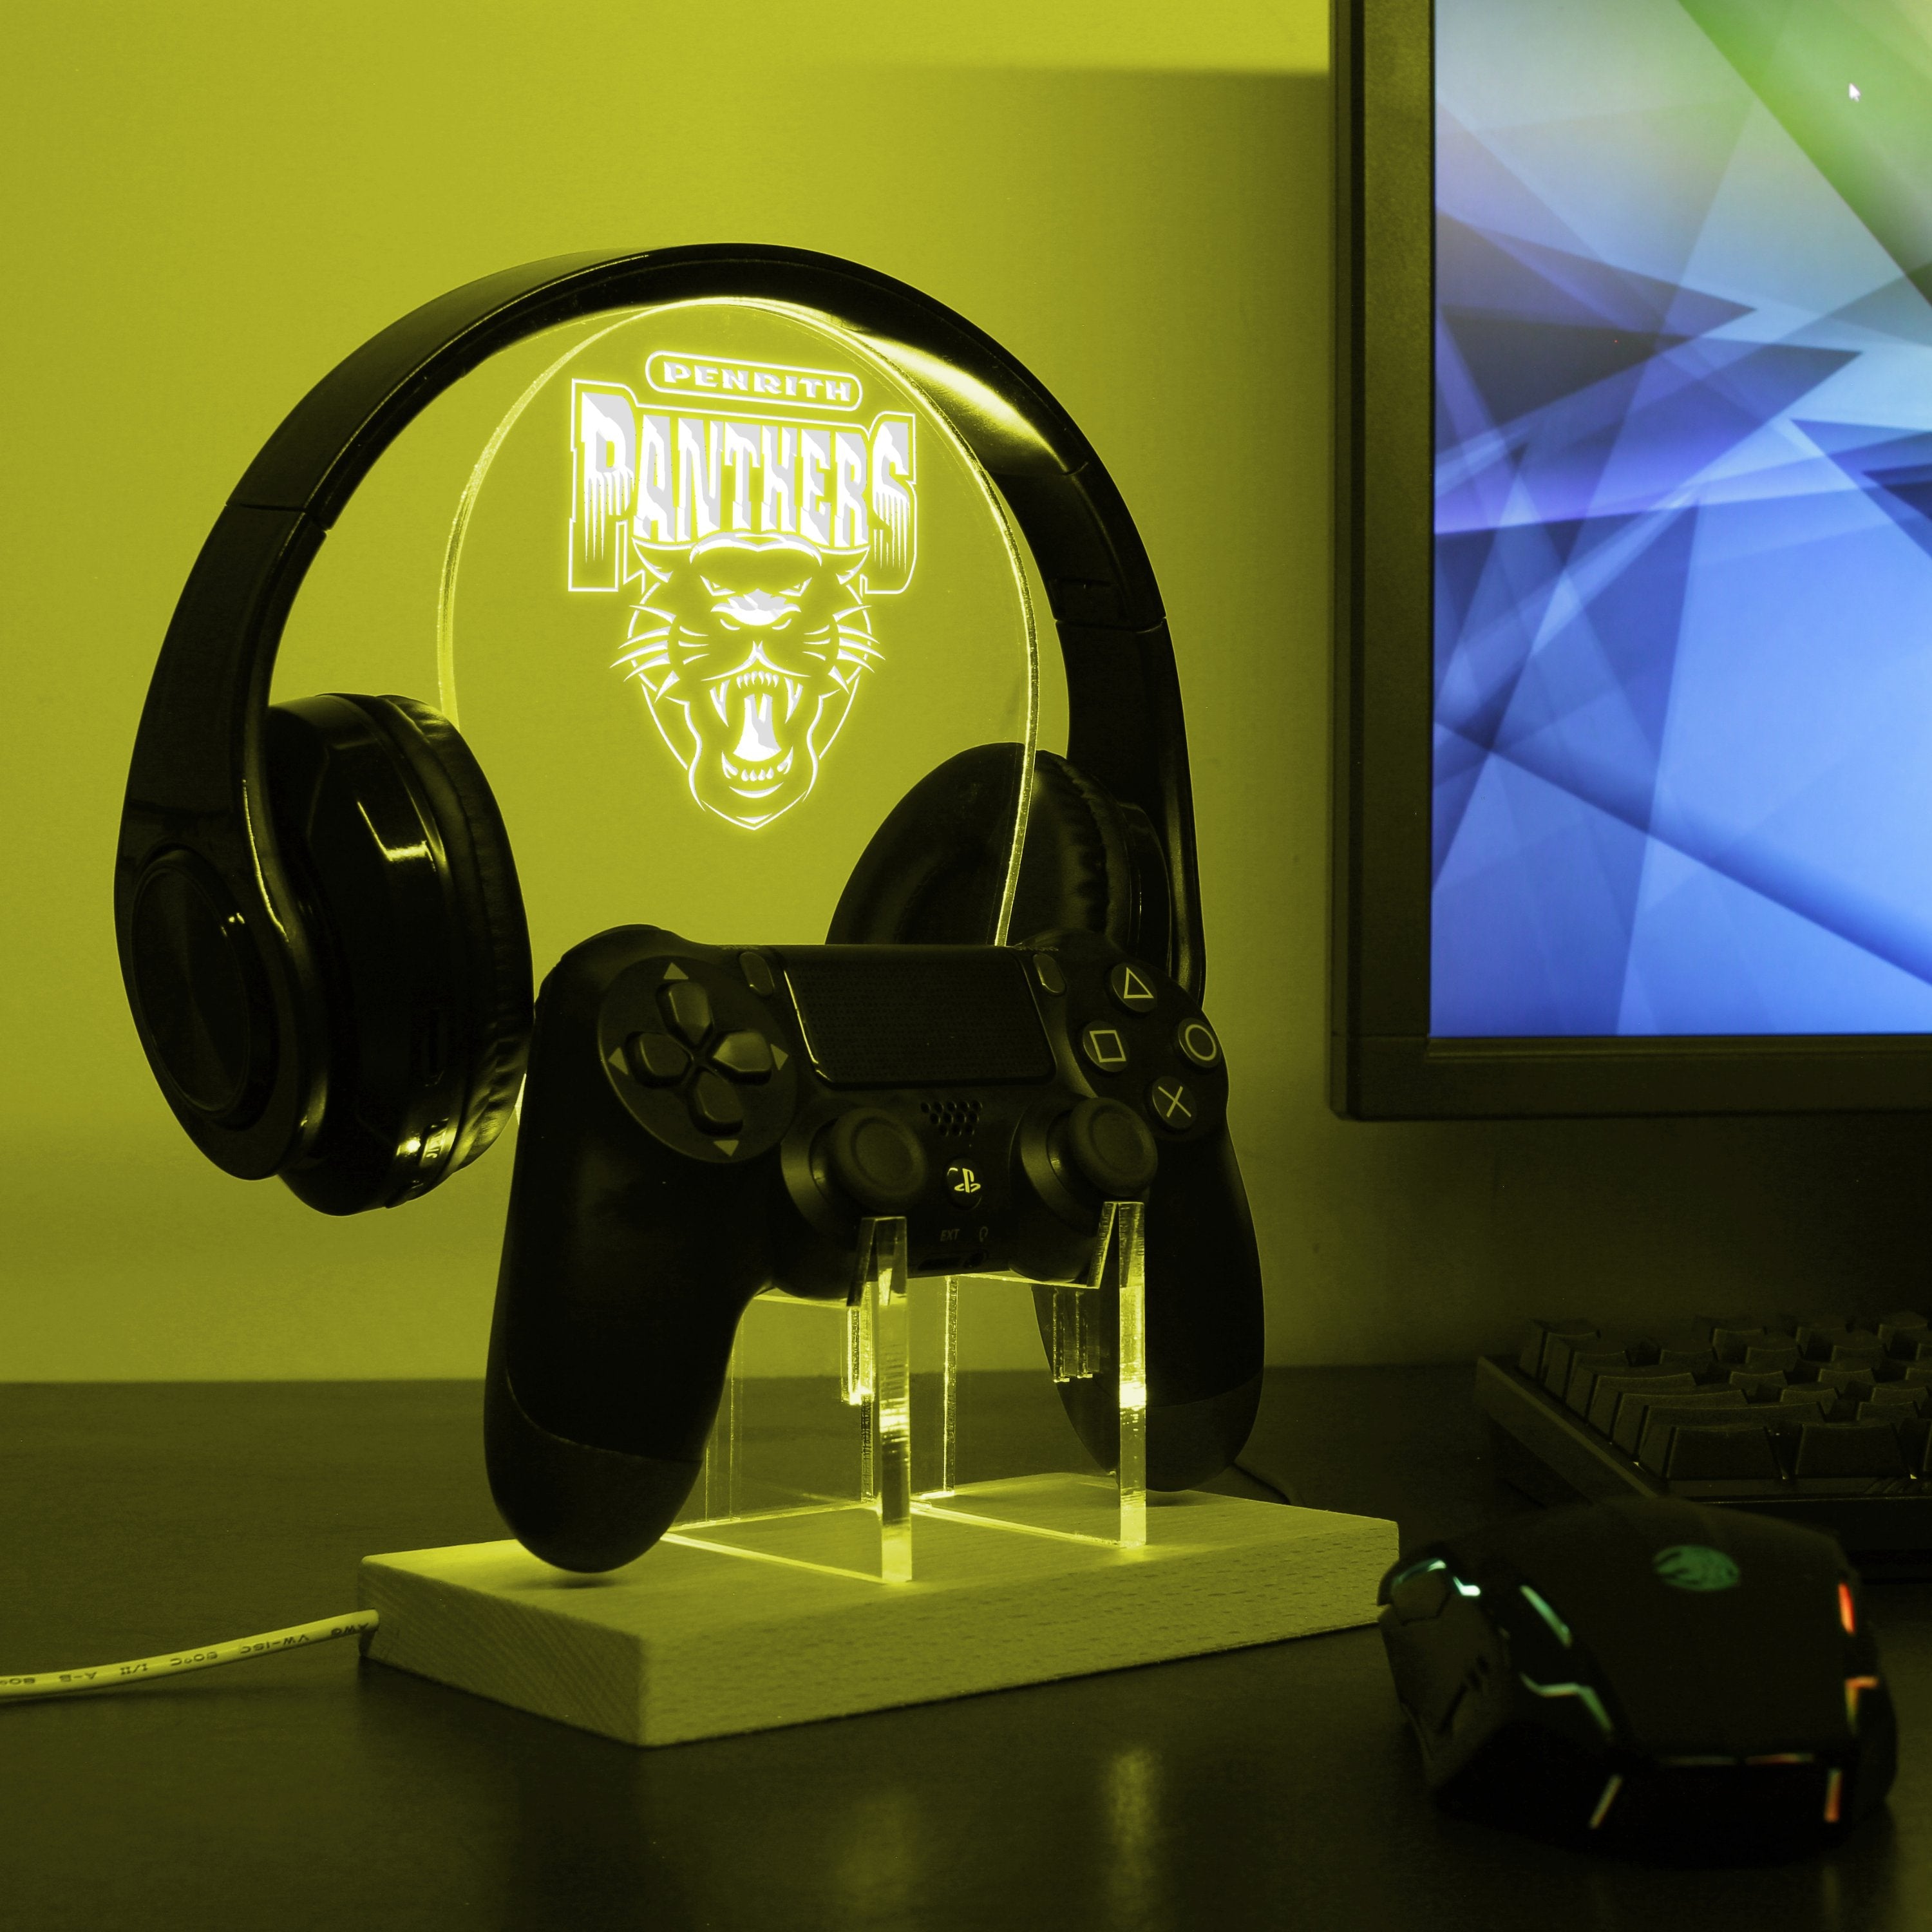 Penrith Panthers LED Gaming Headset Controller Stand